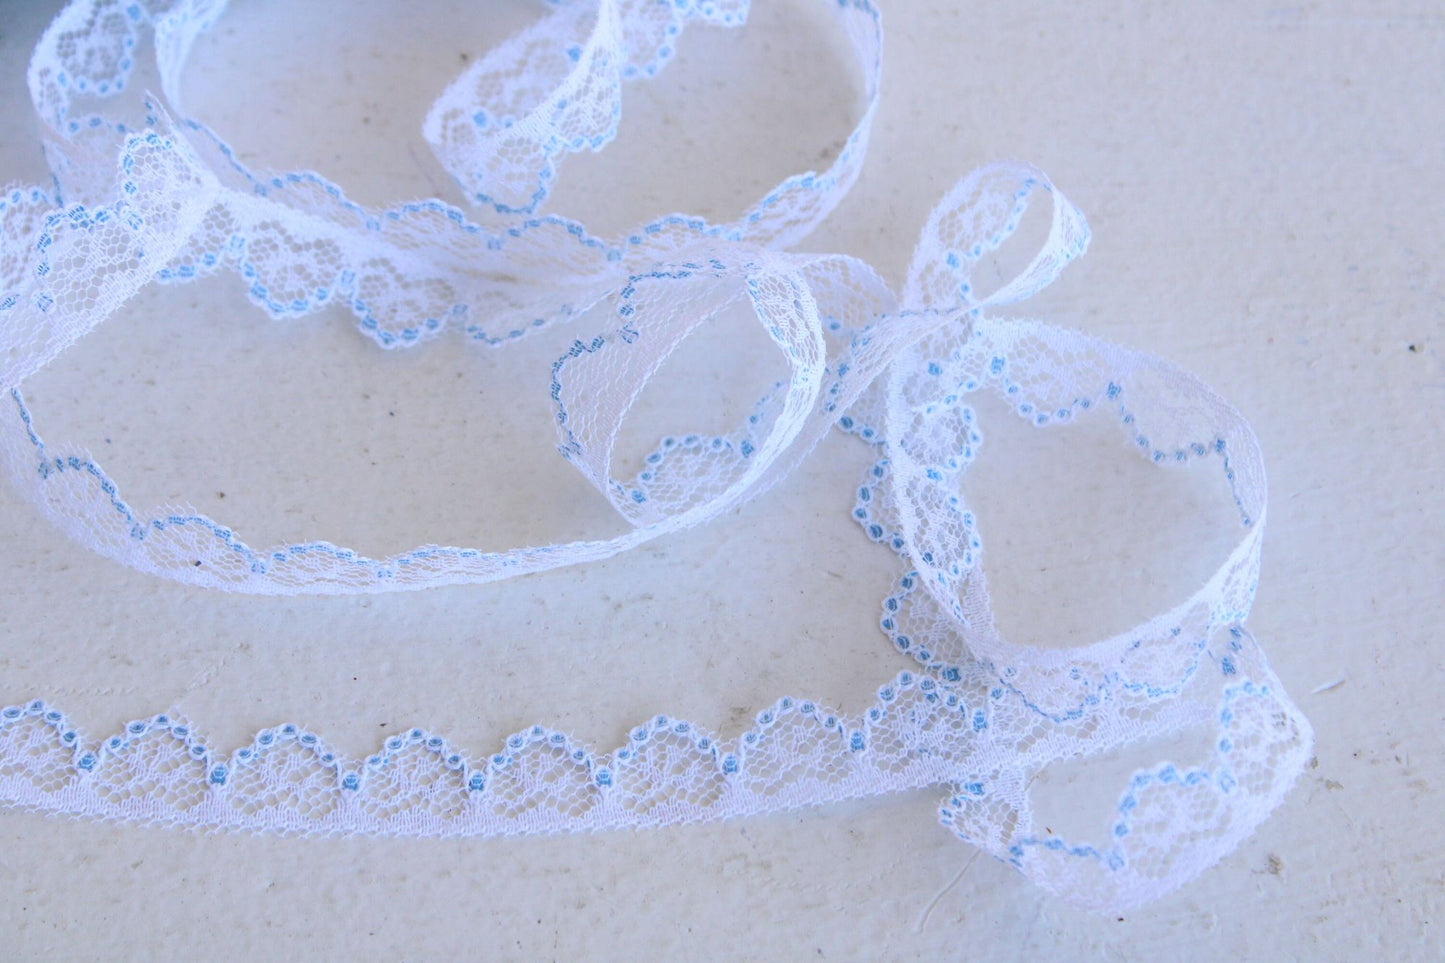 Vintage Lace Trim, White and Blue,  7/16" wide 2 yards